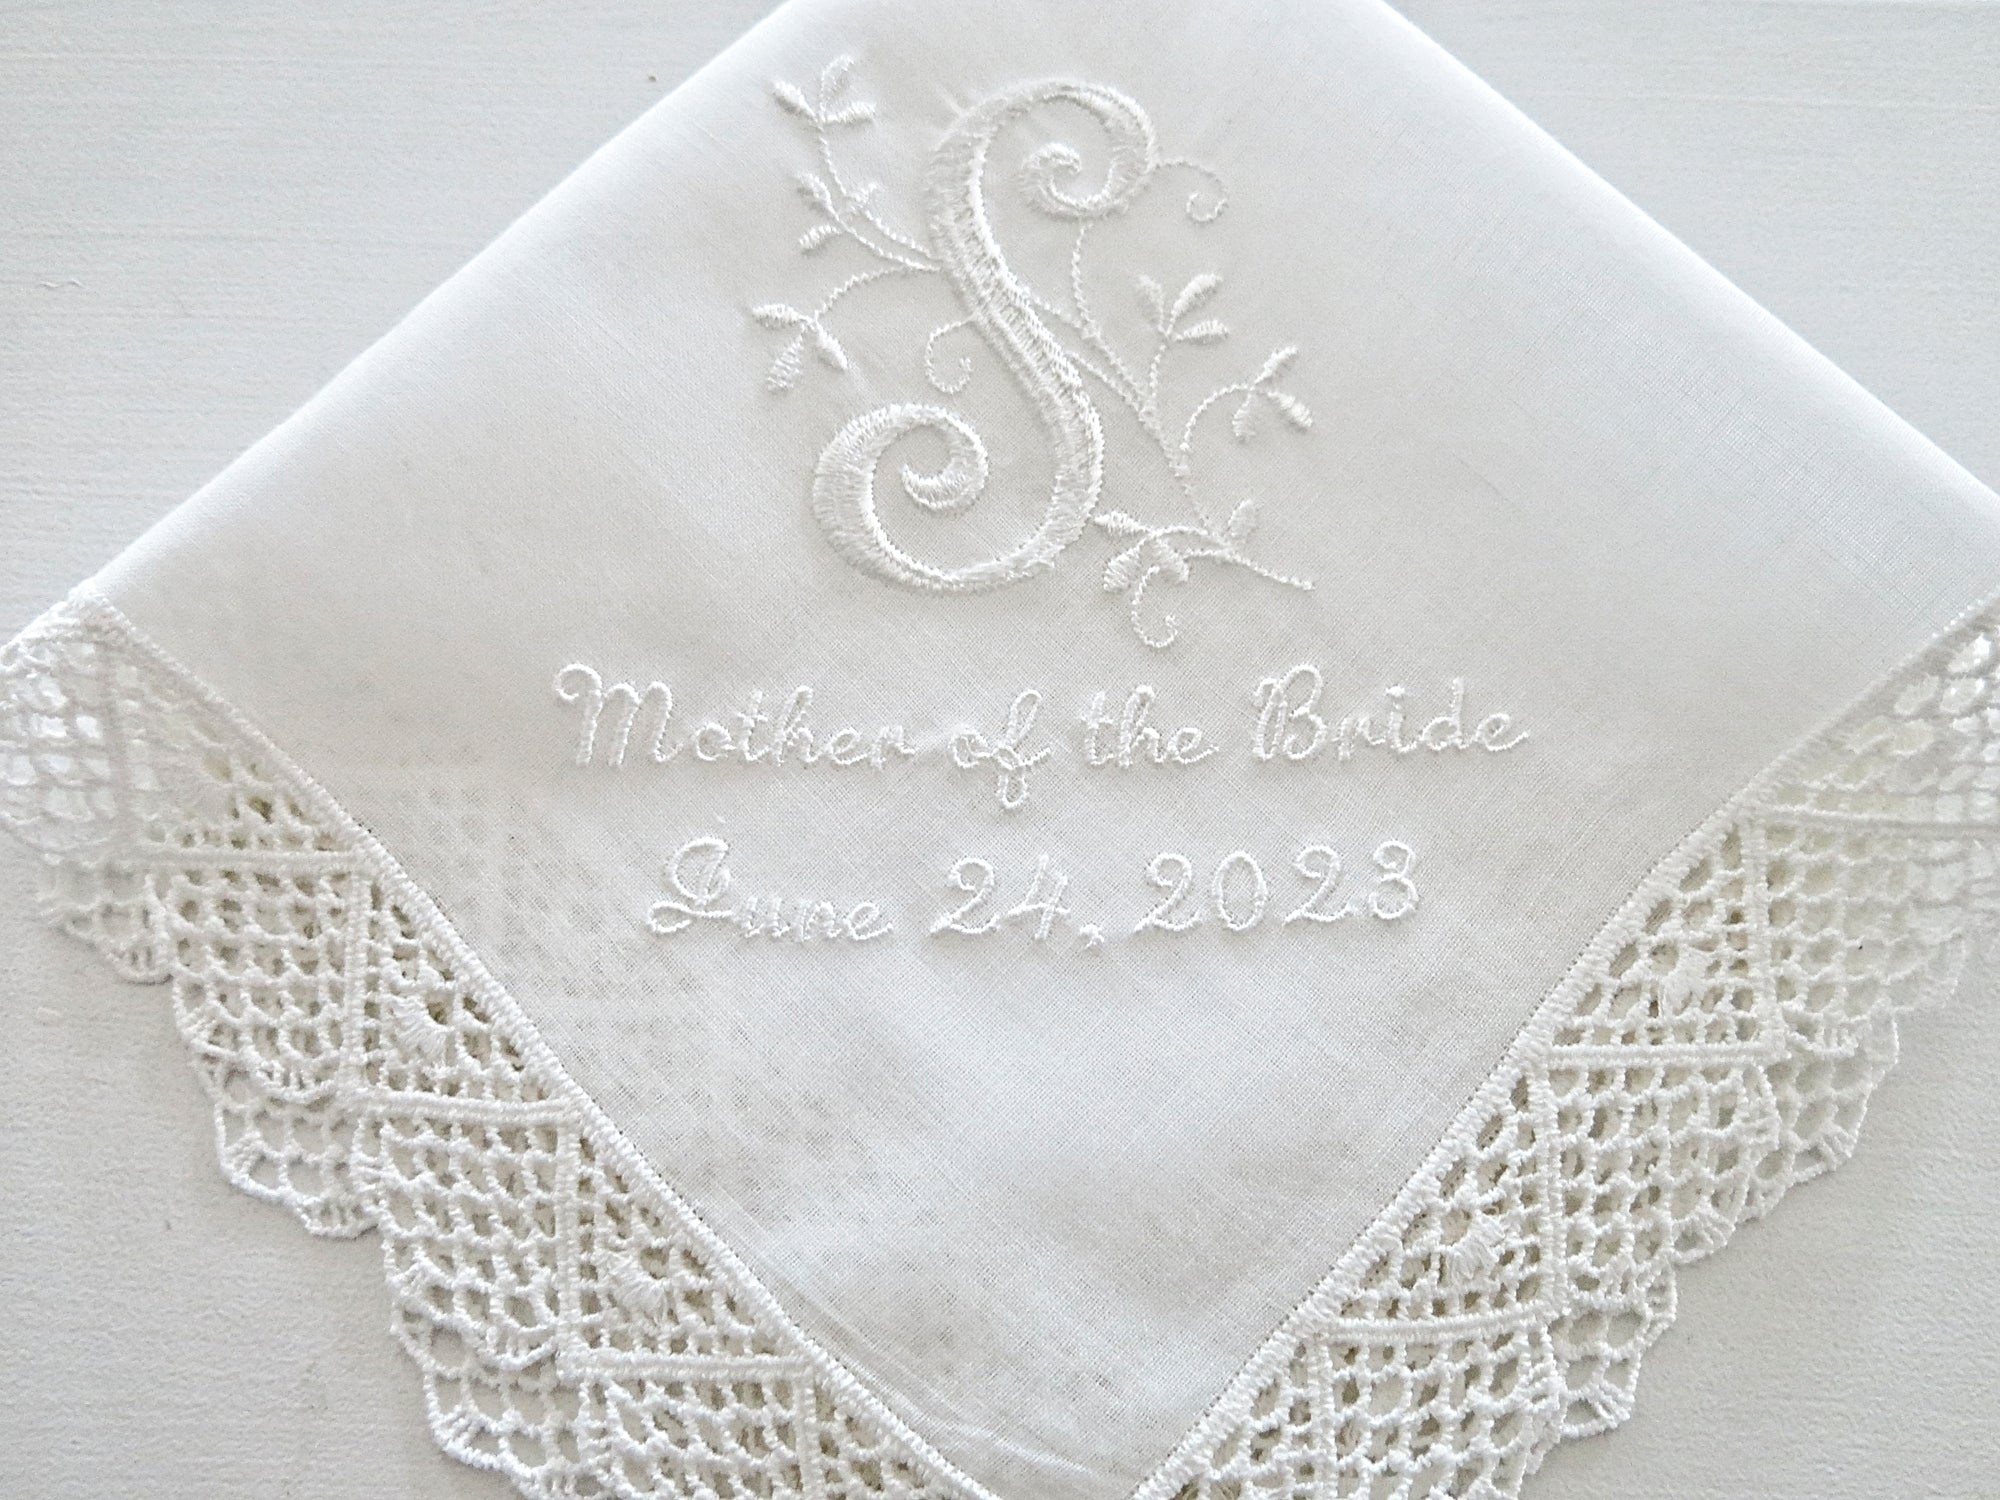 Lovely Wedding Handkerchief with Floral Design 1 Initial Monogram, Title & Date